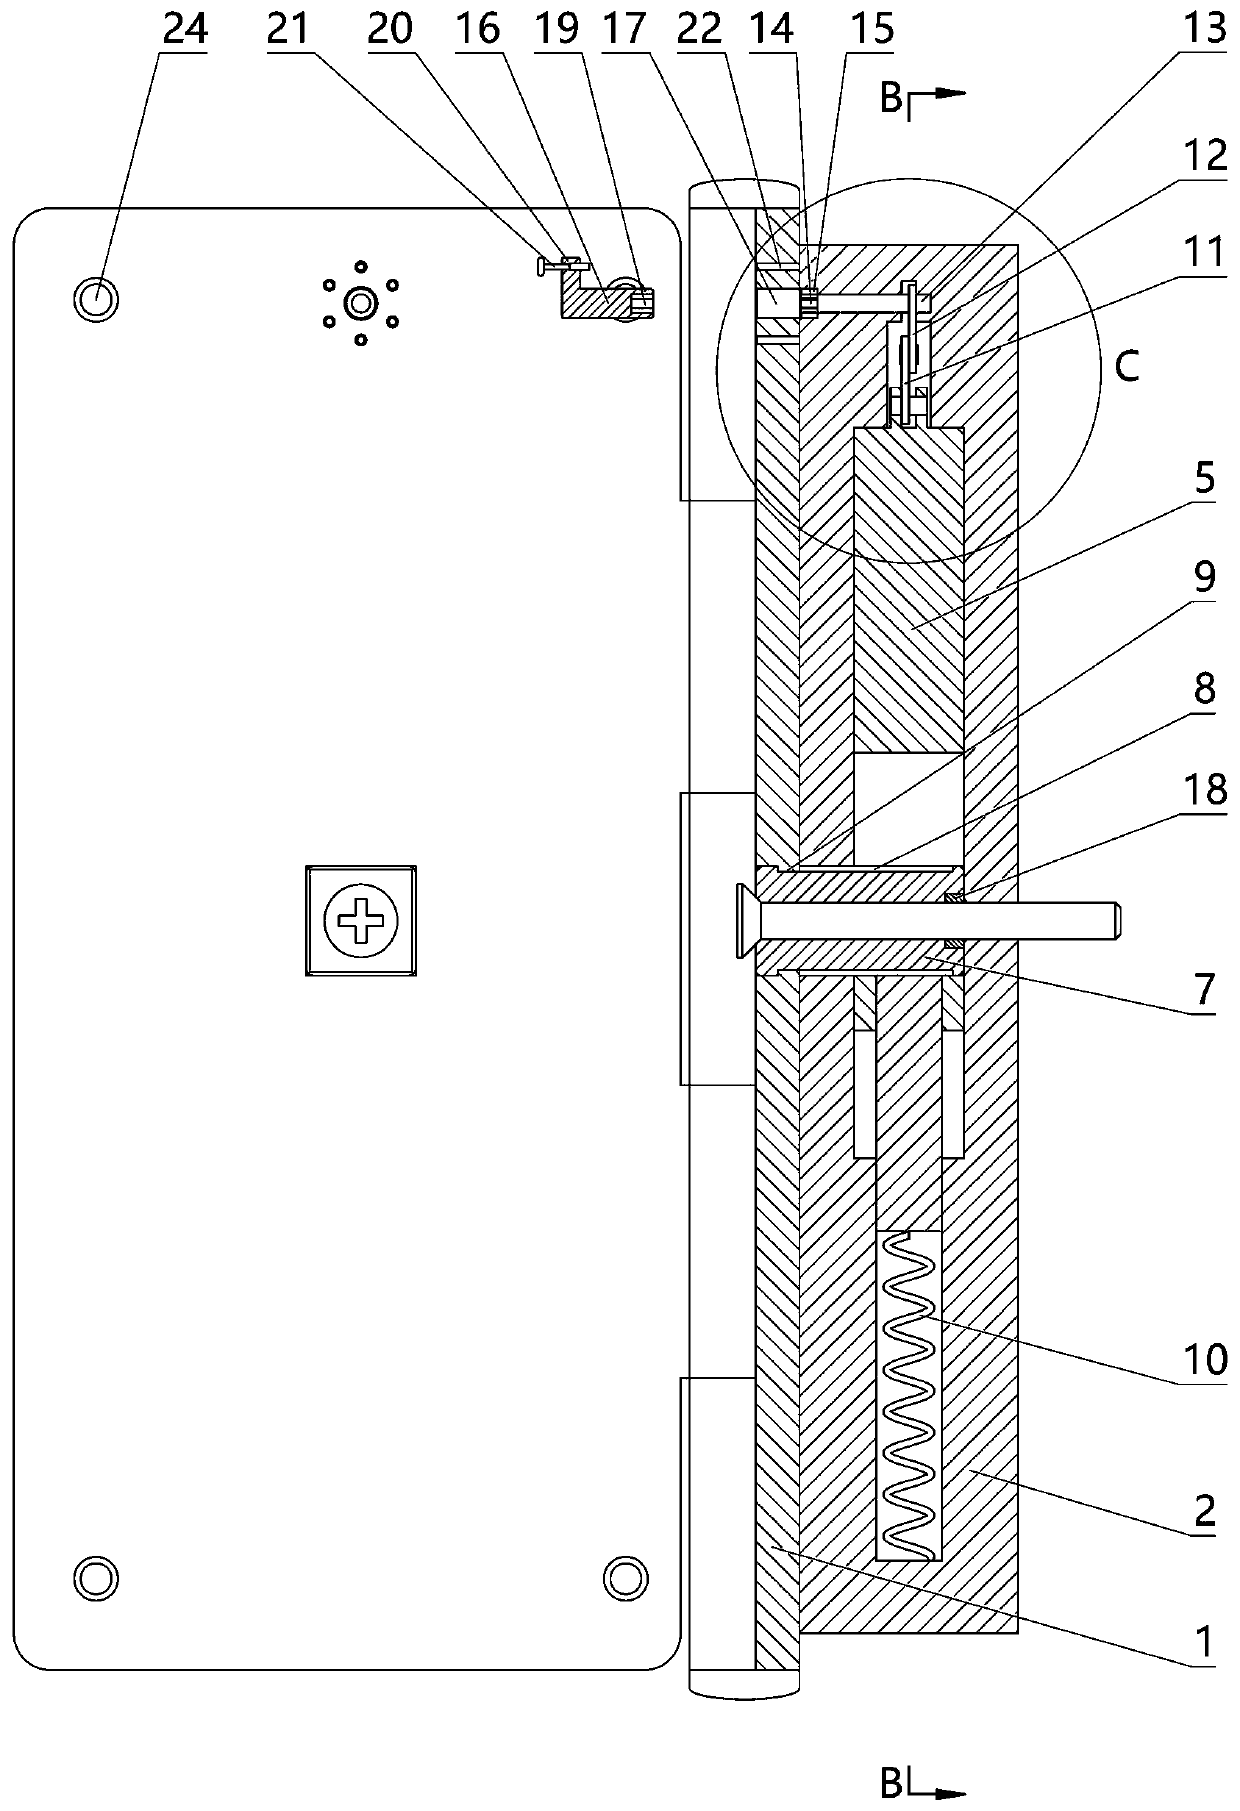 An anti-disassembly hinge and a method for preventing disassembly of the hinge